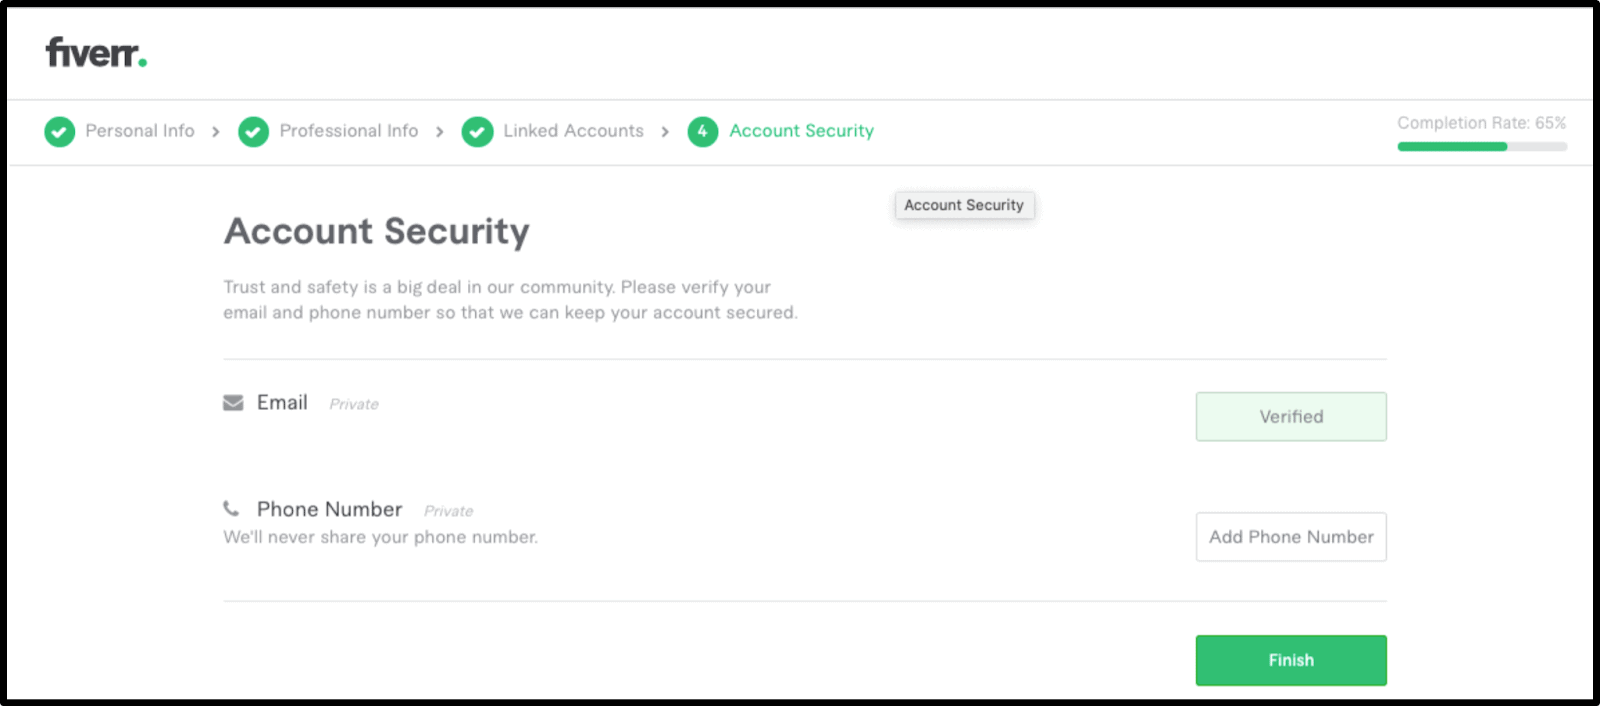 Fiverr account security page